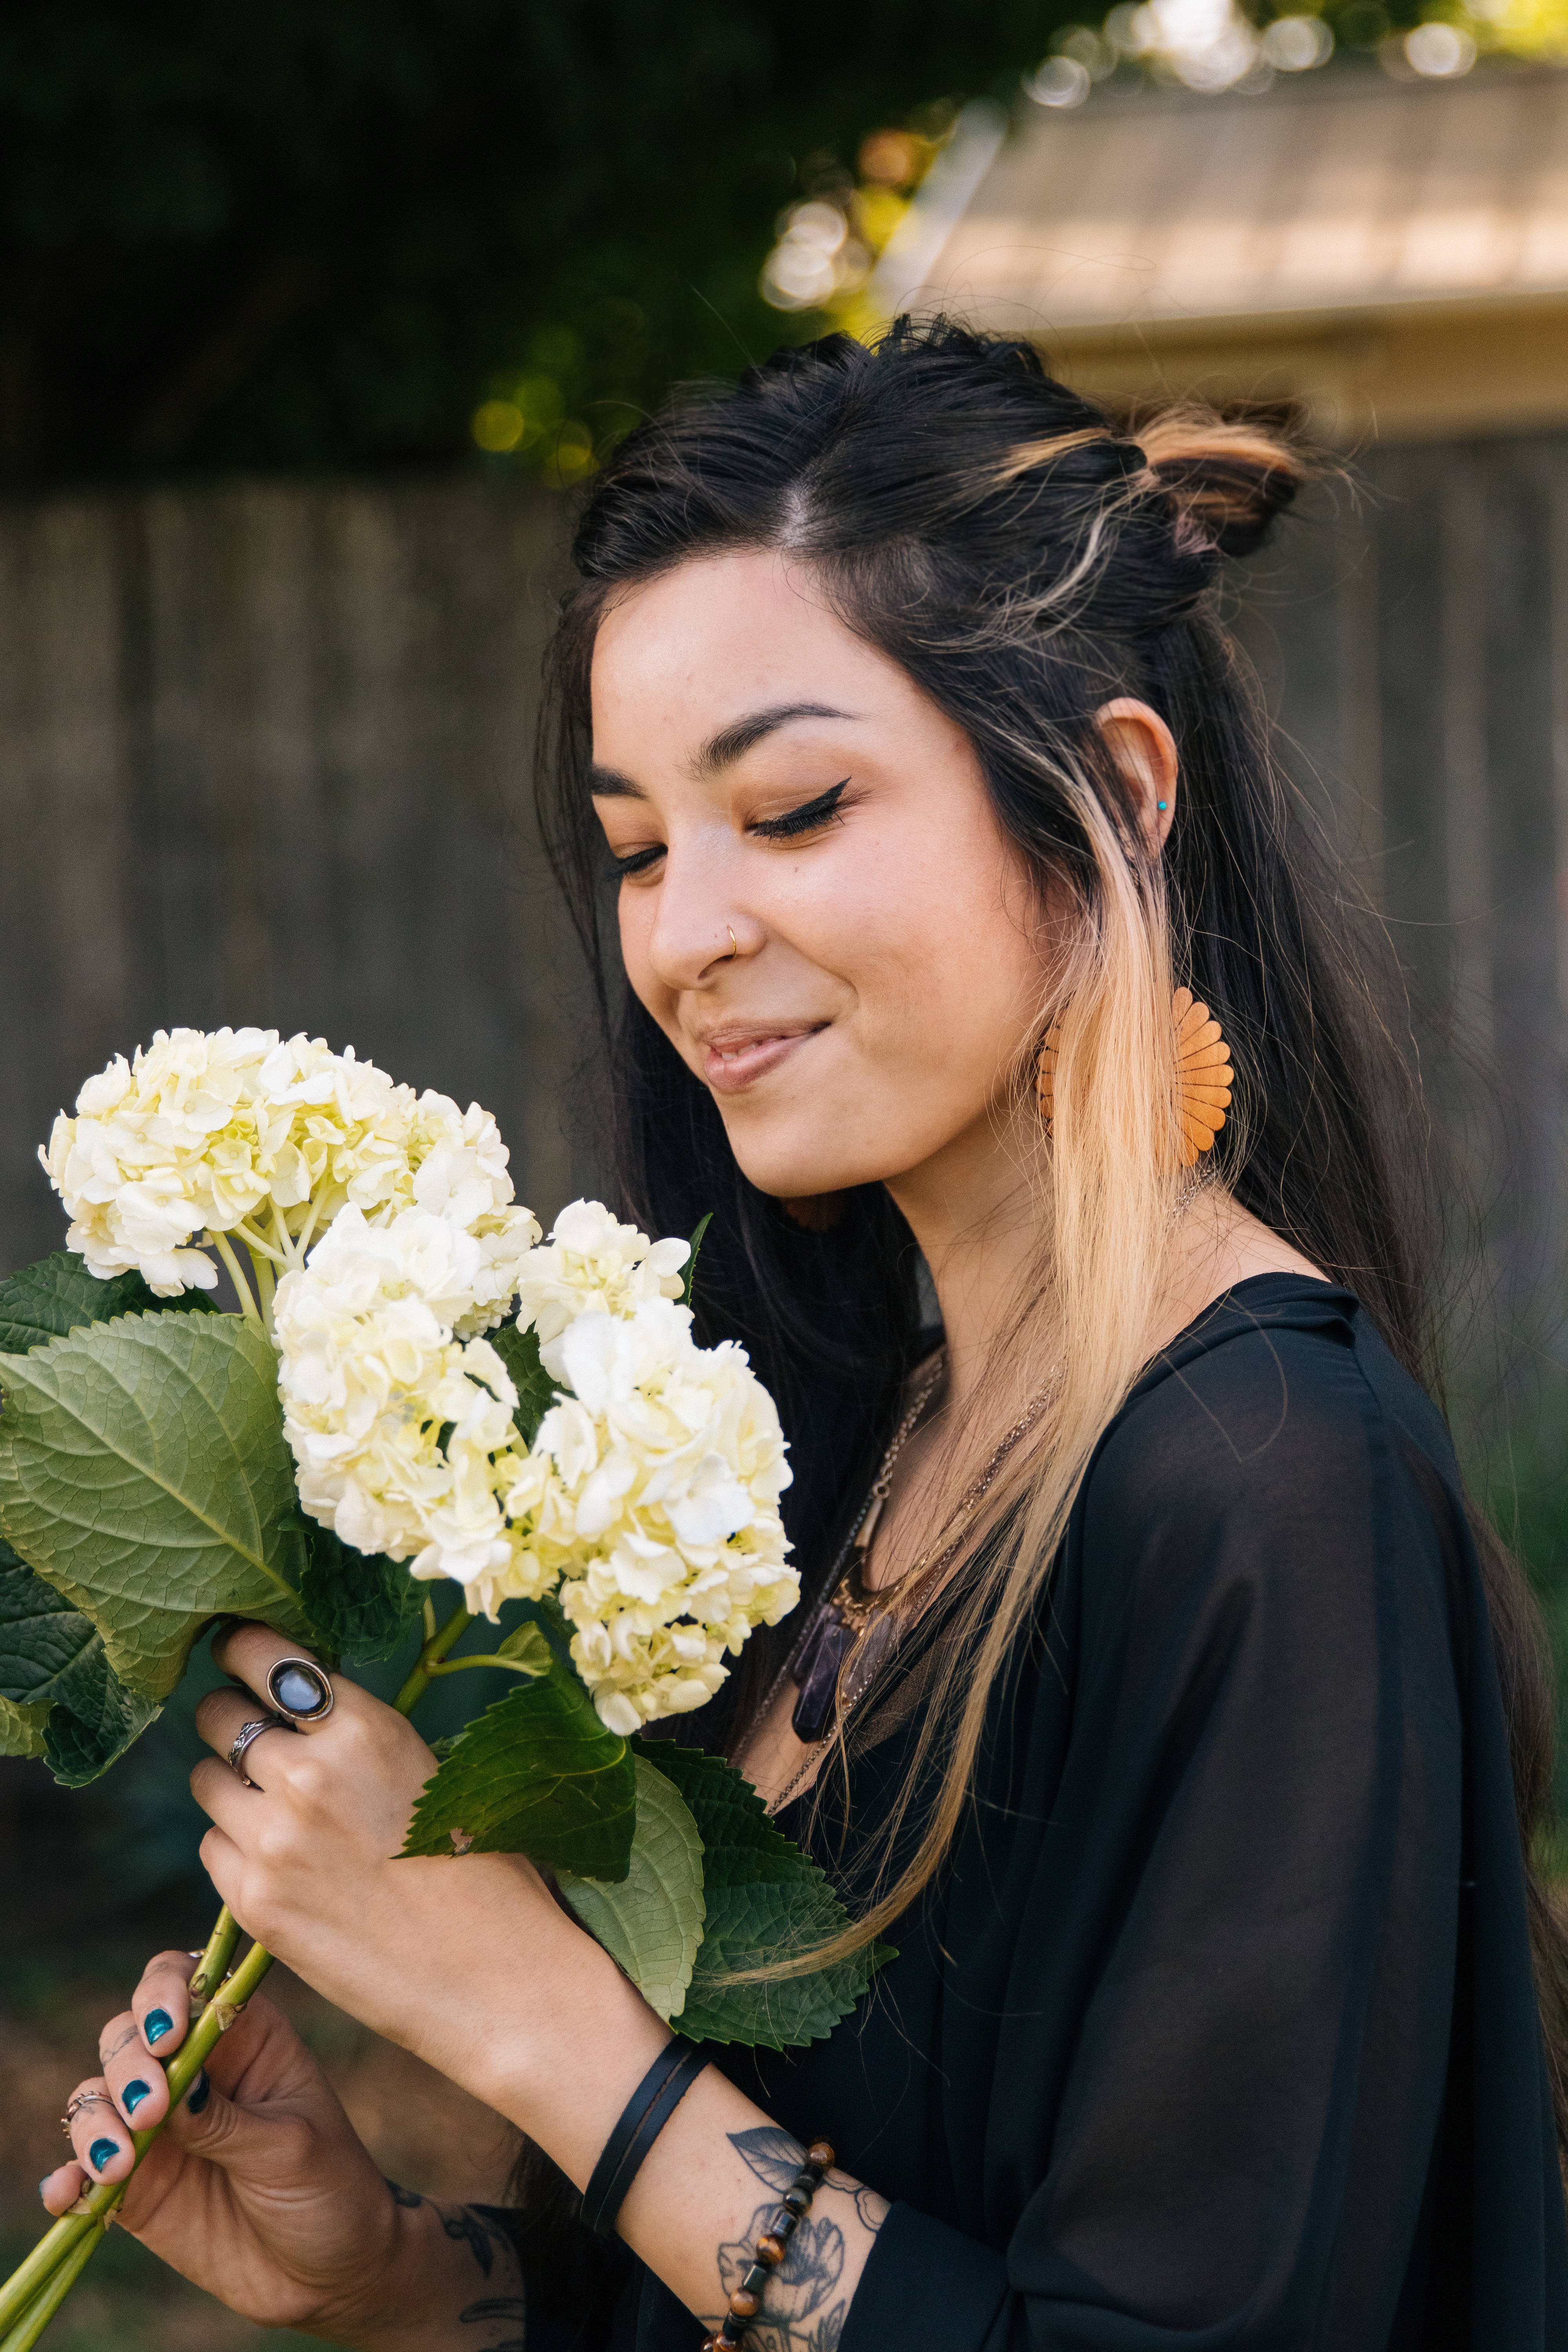 young-woman-with-witchy-makeup-hair-jewelry-and-nails-holding-large-white-flowers-looking-down-and-smiling